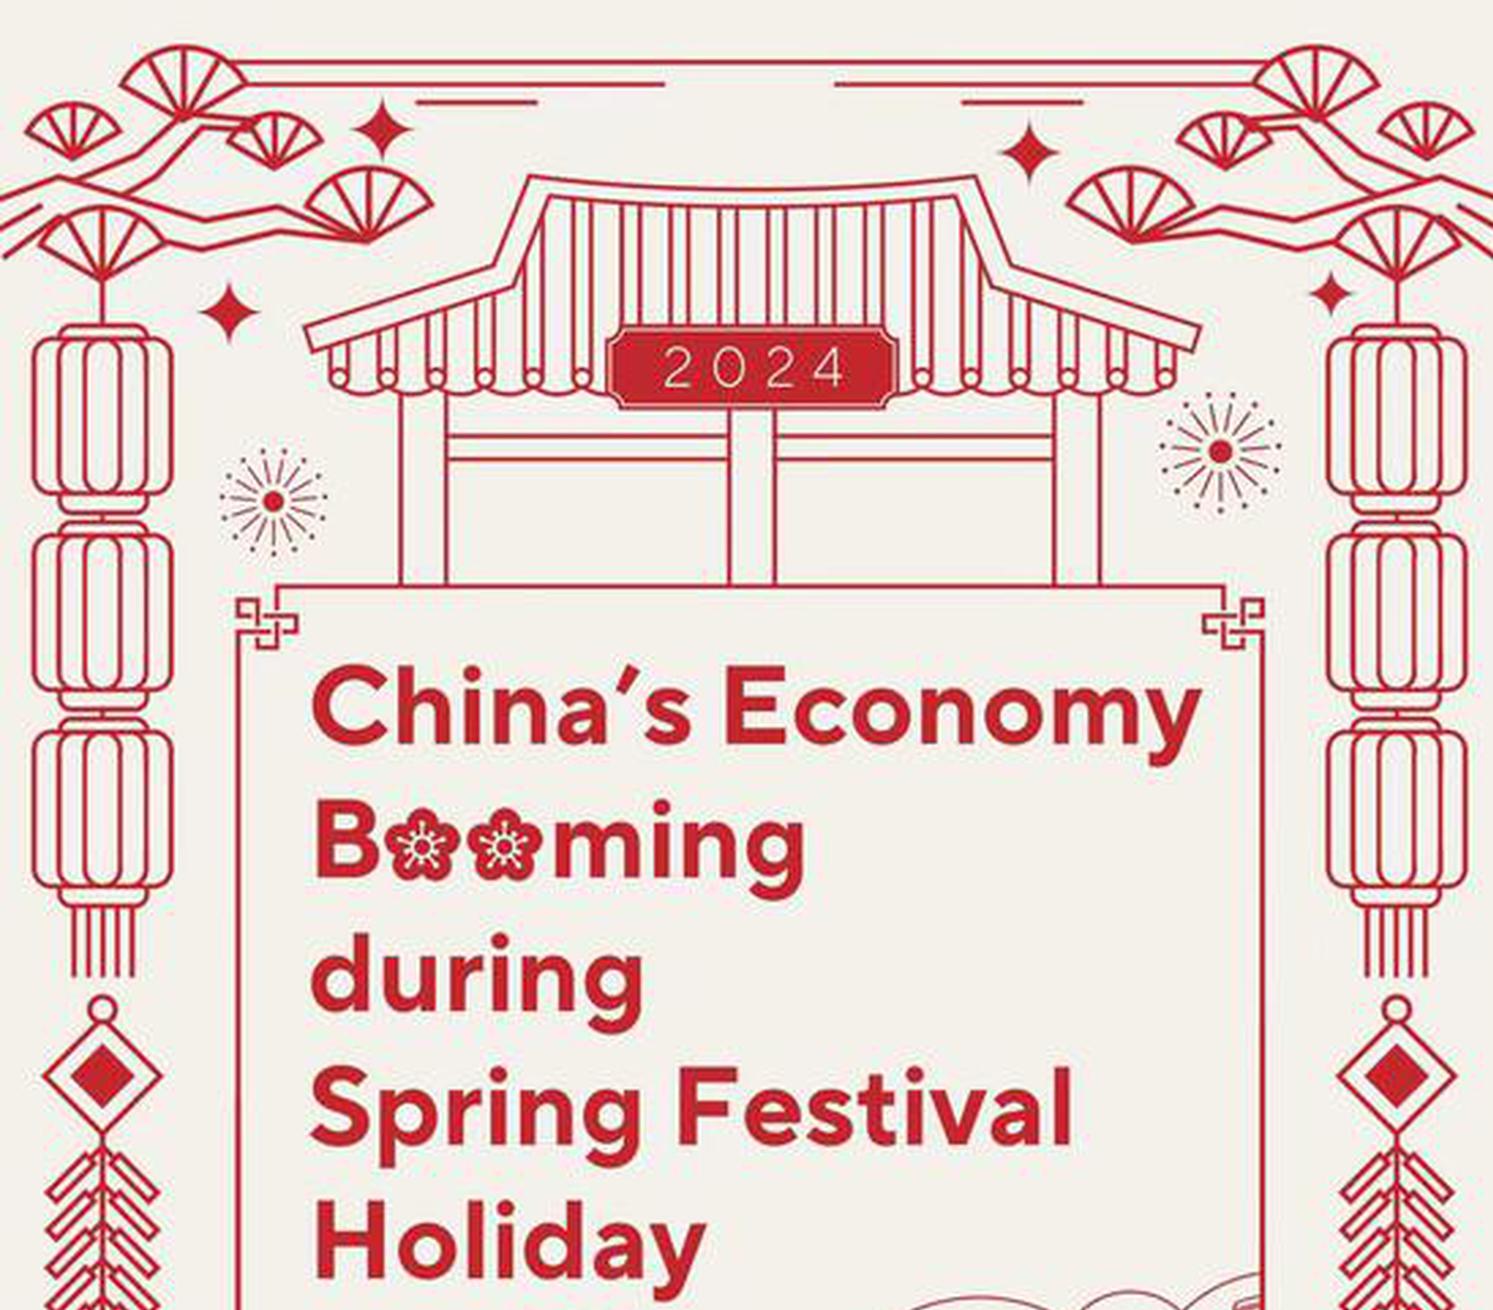 China's economy booming during Spring Festival holiday